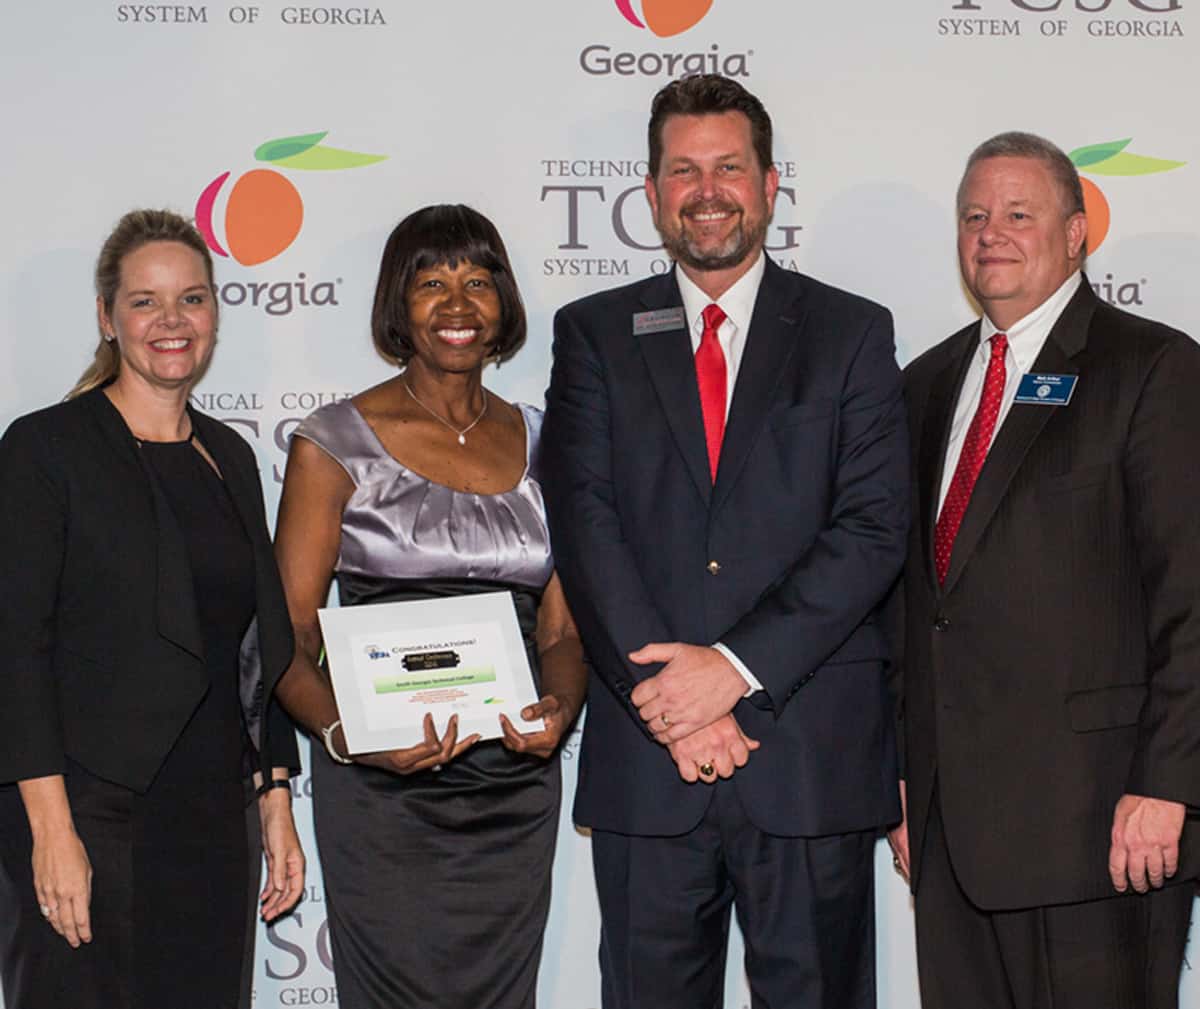 Technical College System of Georgia (TCSG) Commissioner Gretchen Corbin is shown above (l to r) congratulating South Georgia Technical College Board of Directors Chairperson Janet Siders and SGTC President Dr. John Watford for South Georgia Tech’s 2016 – 2017 Board of Directors earning their 100% certification award from the Technical College System of Georgia and the Technical College Directors Association recently. TCSG Deputy Commissioner Matt Arthur is also shown.